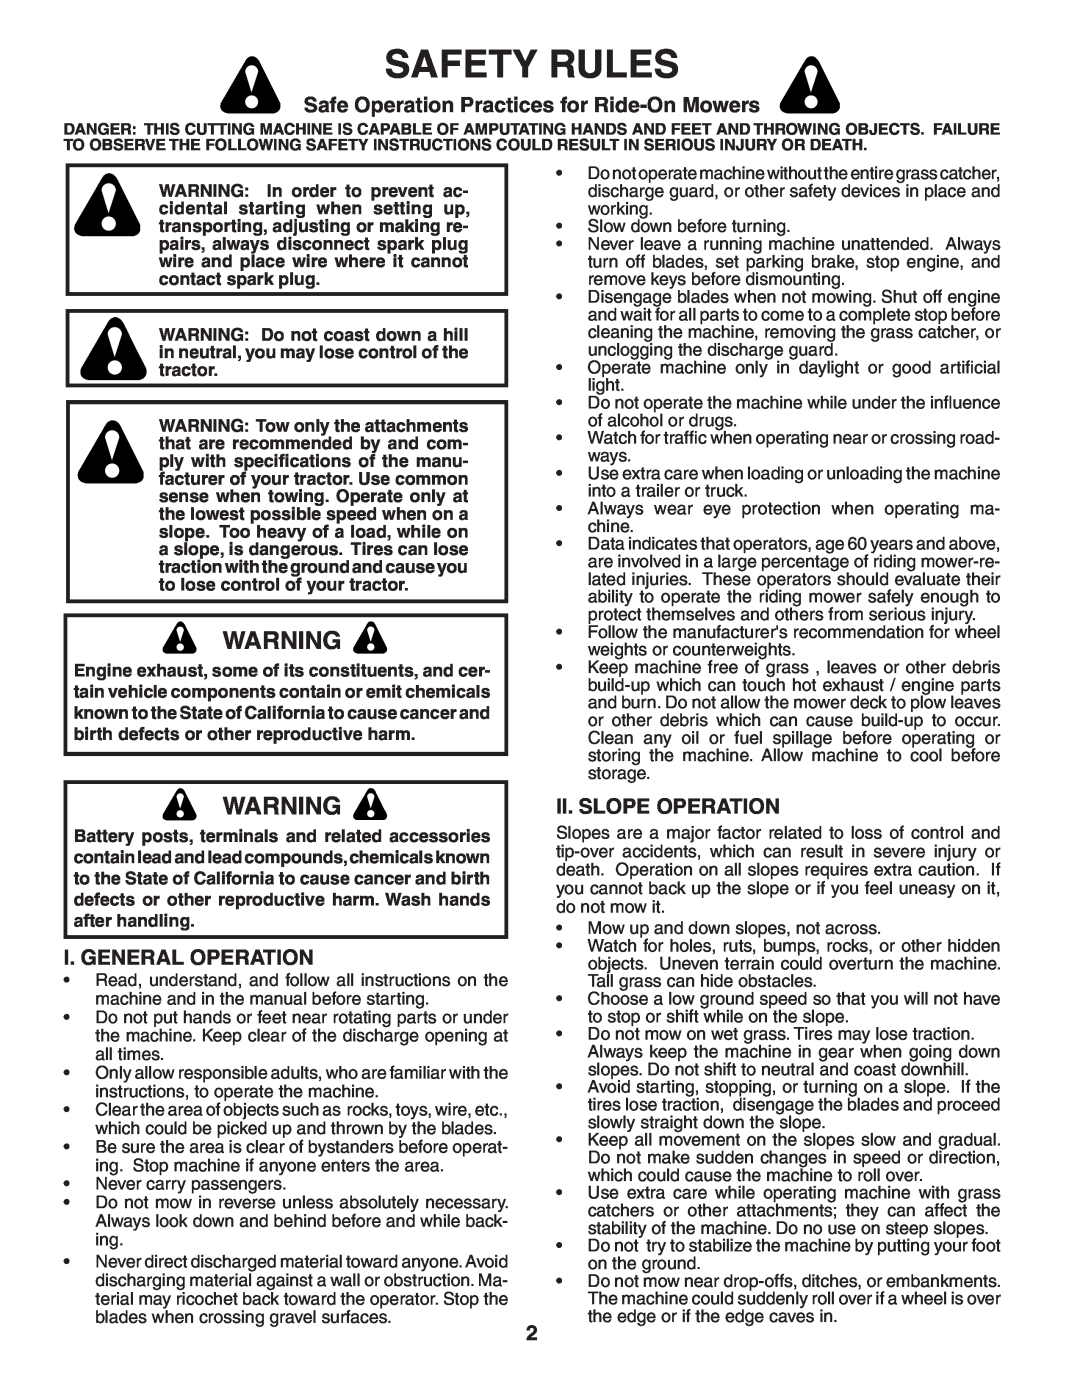 Poulan 402464 manual Safety Rules, Safe Operation Practices for Ride-On Mowers, I. General Operation, Ii. Slope Operation 